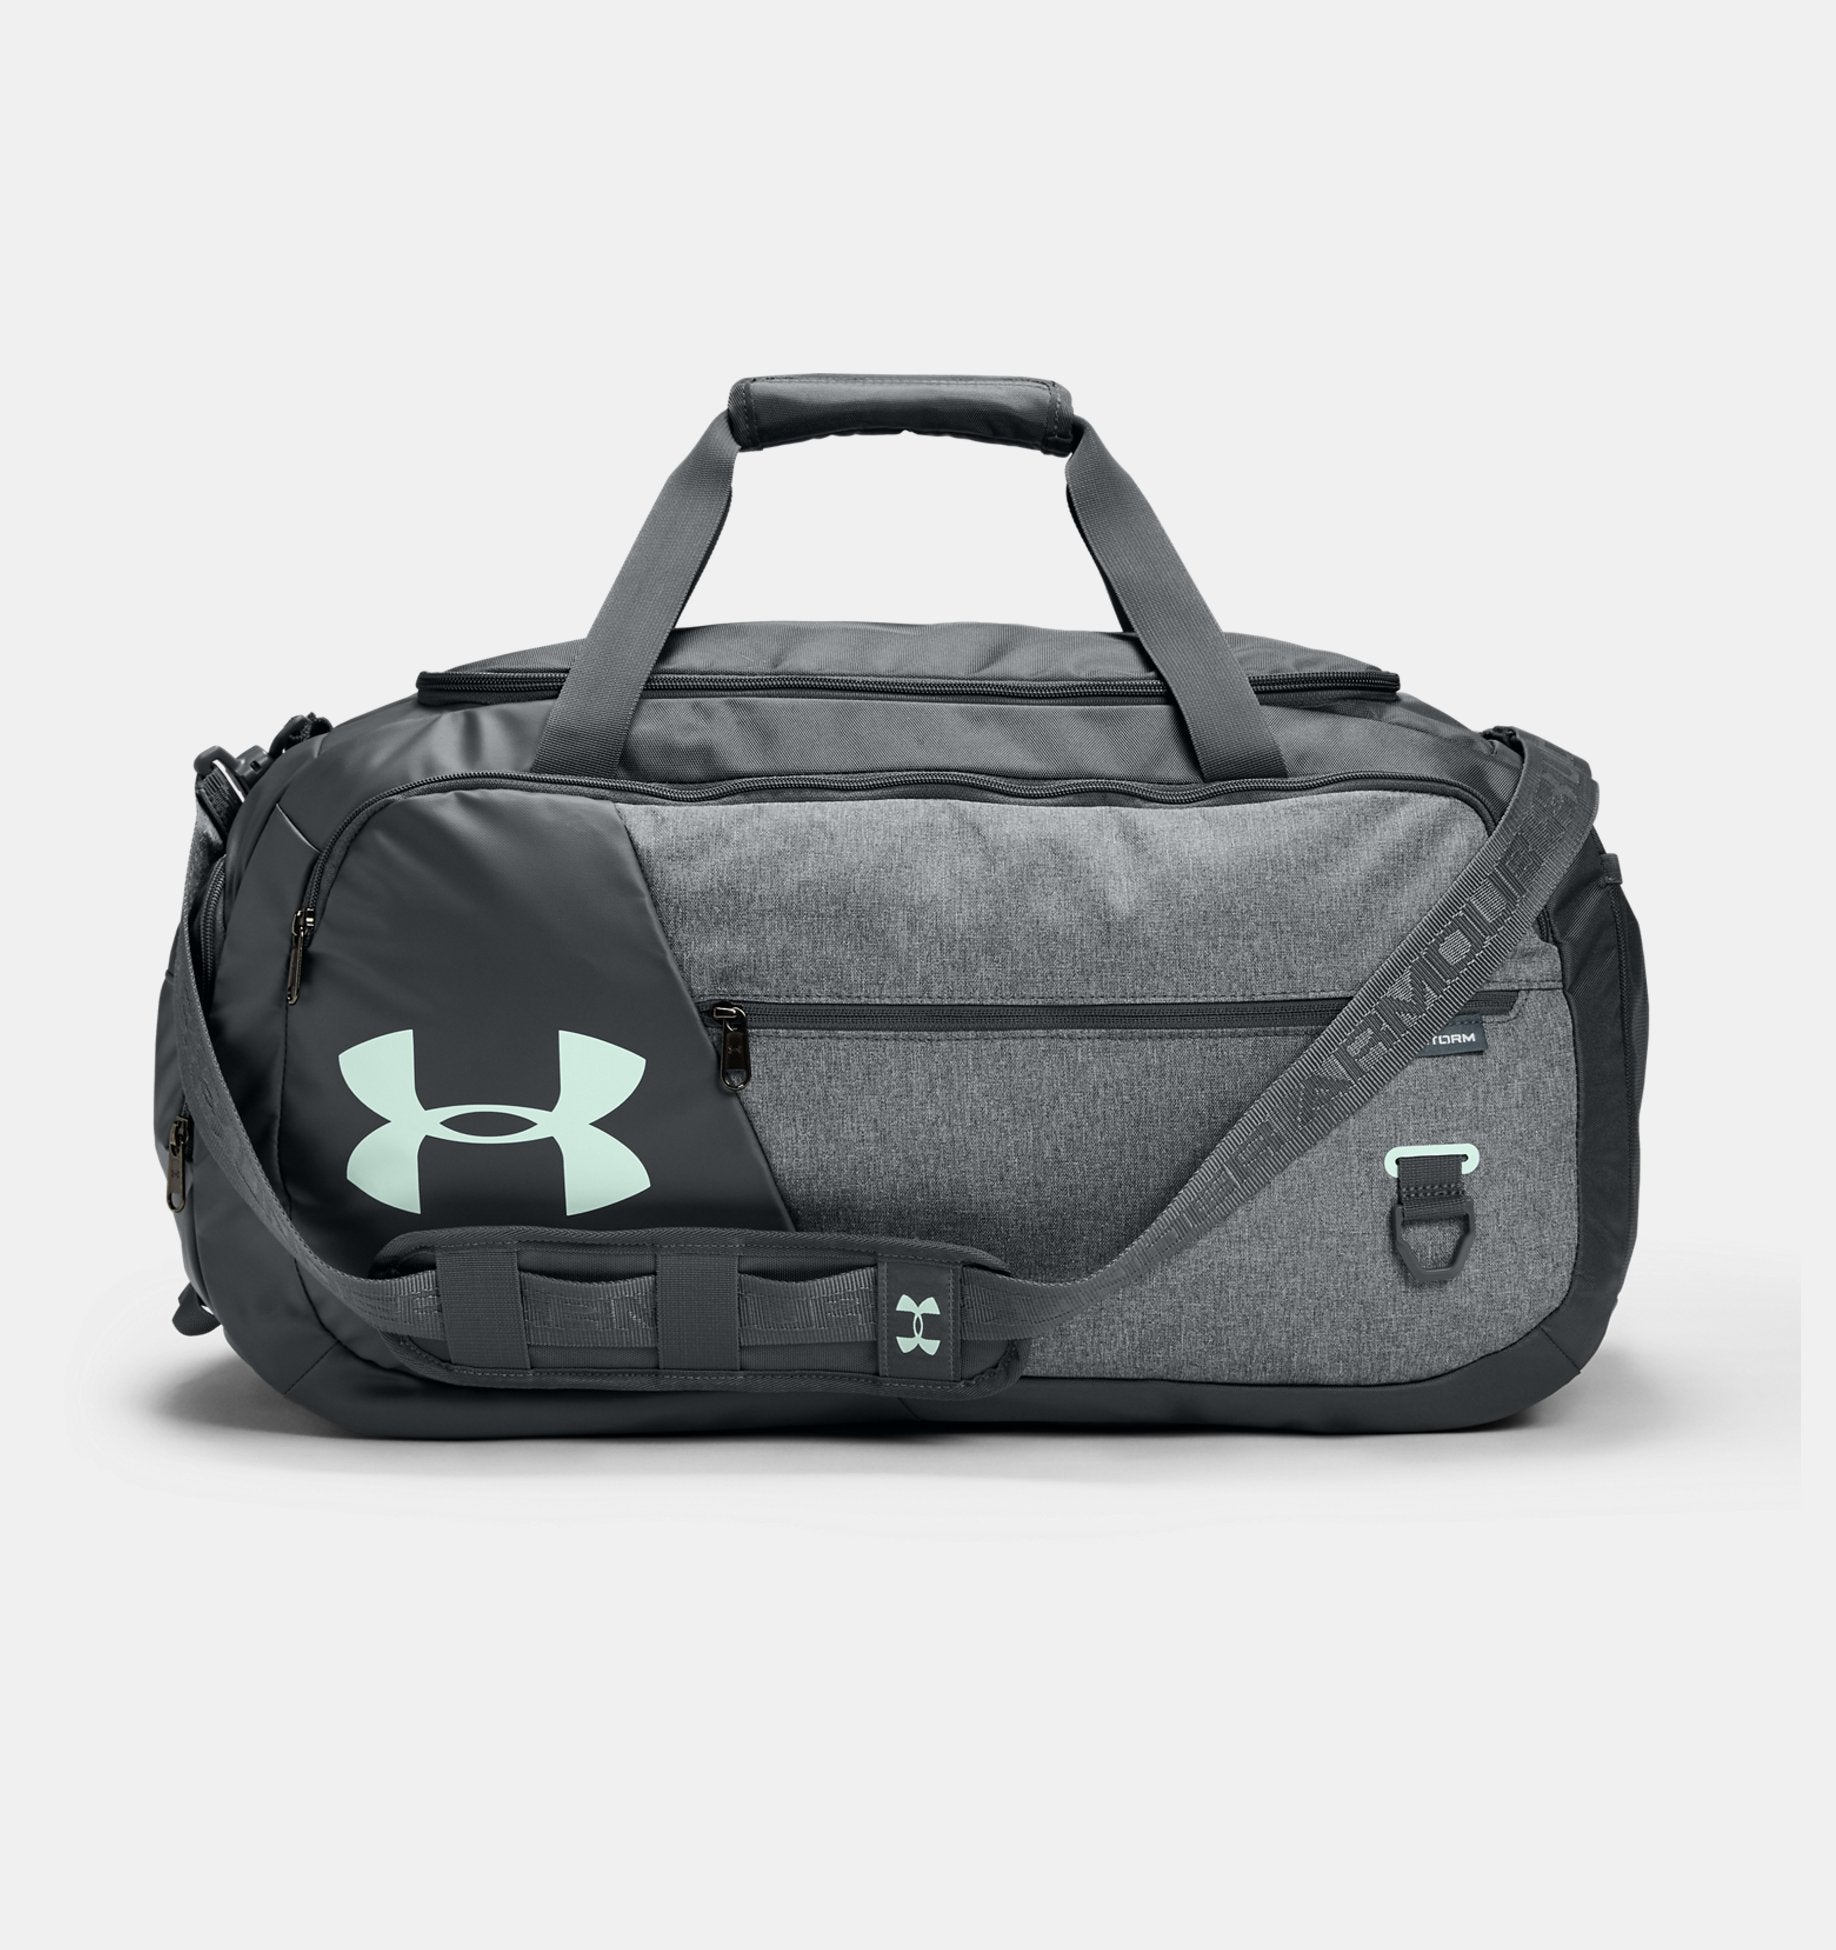 Under Armour Sports Bag Undeniable Duffel med. graphite/black, Under  Armour Sports Bag Undeniable Duffel med. graphite/black, Carrying Bag, Bags